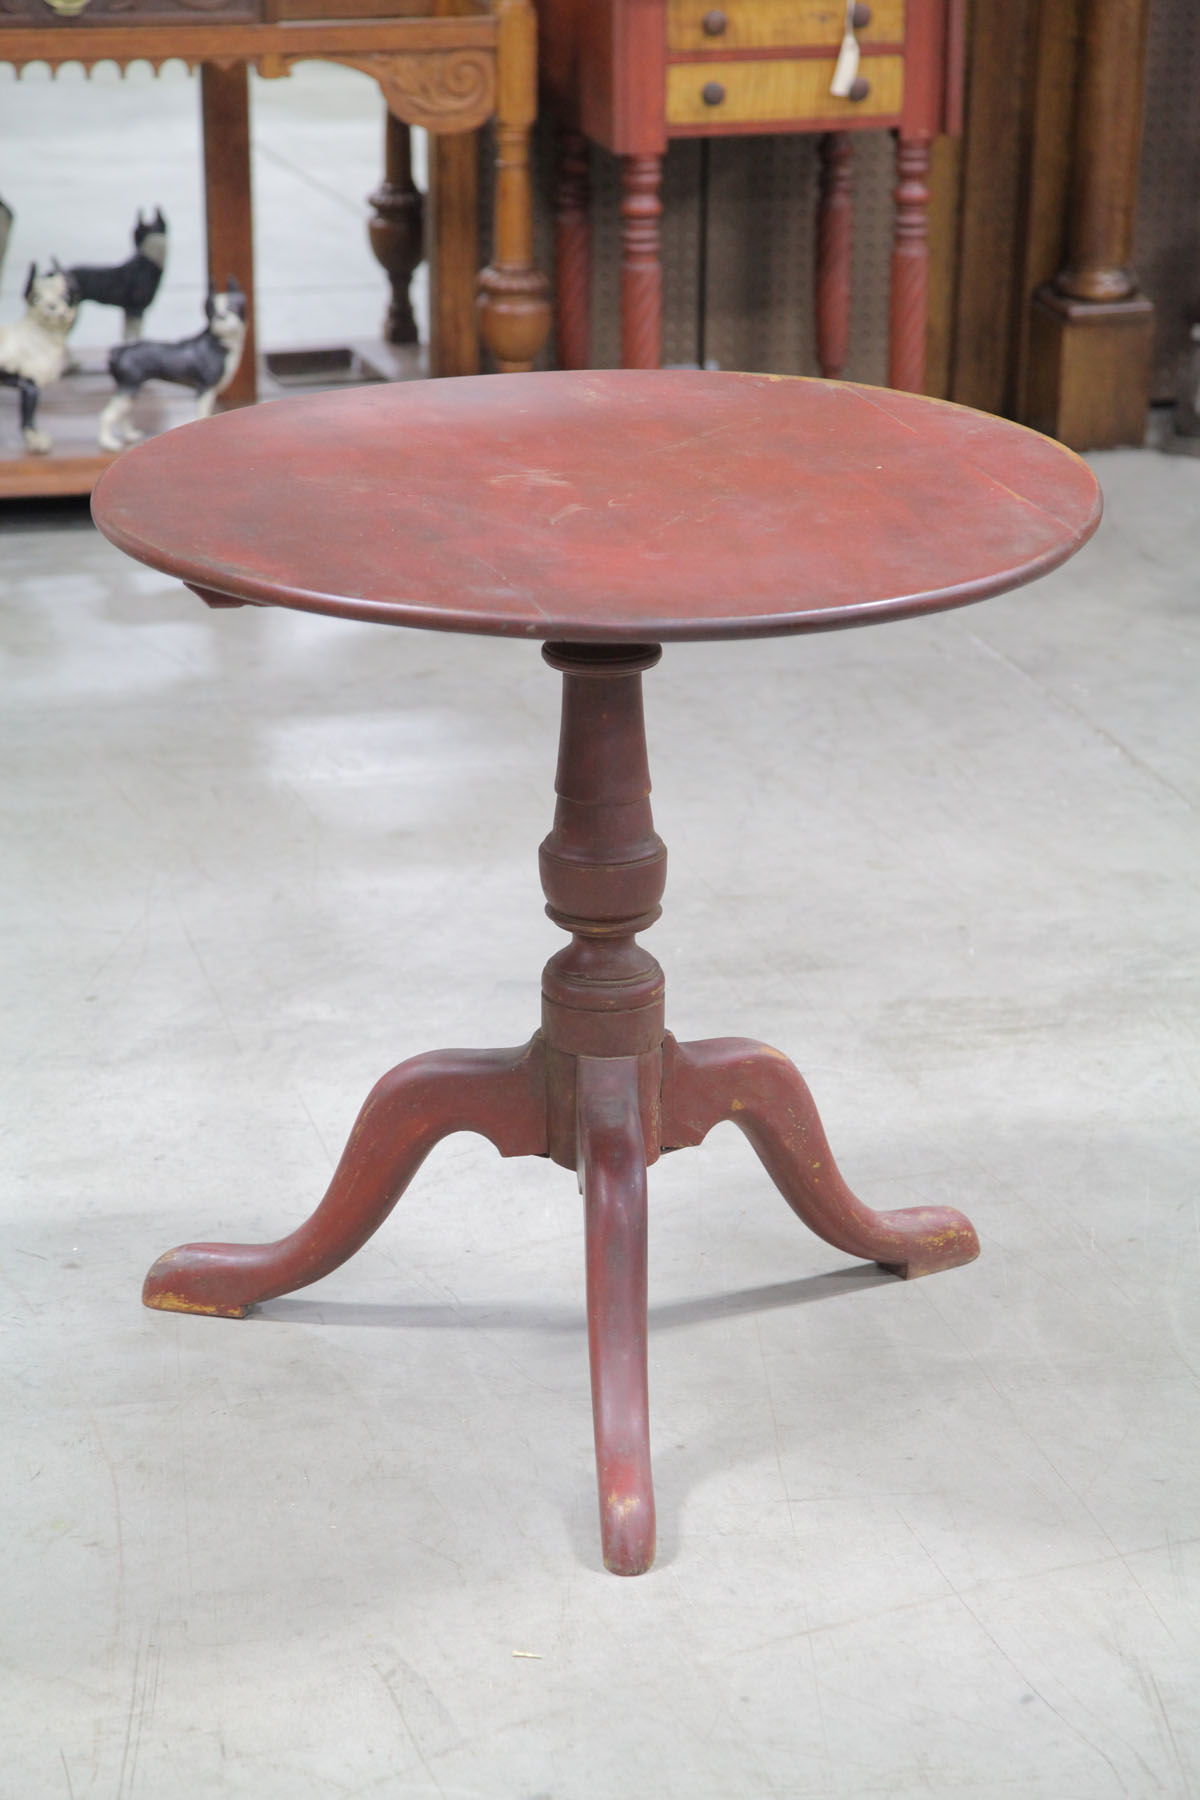 TILT TOP TABLE.  Purportedly from New